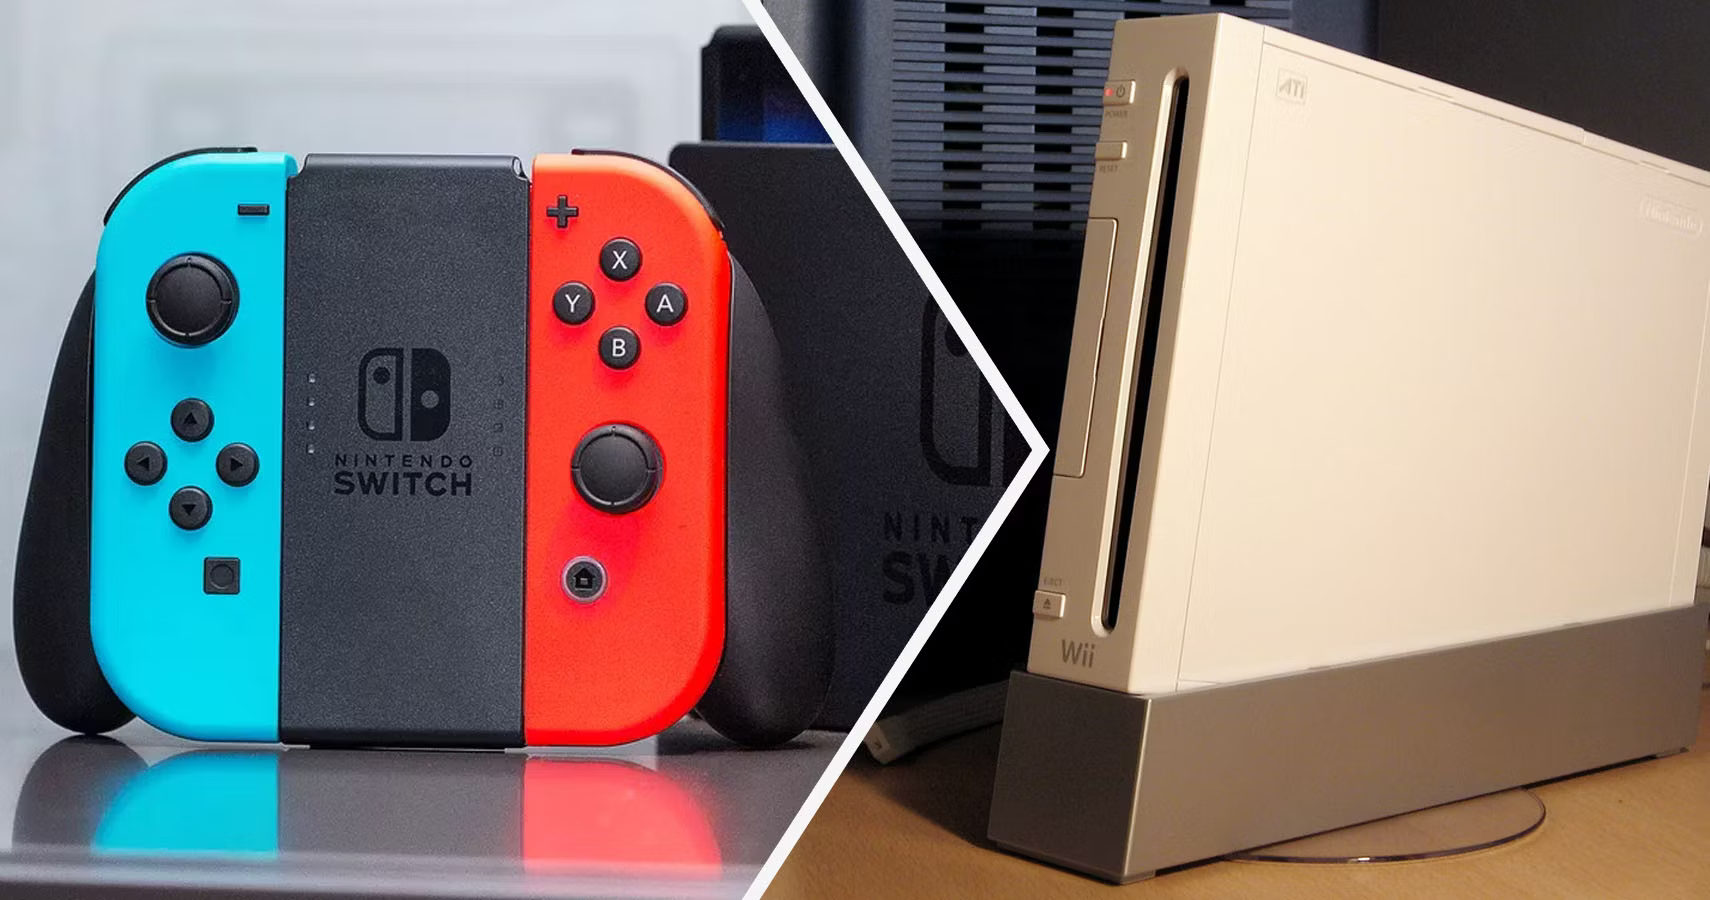 Nintendo Switch sales surpass lifetime Nintendo Wii sales in the US | Page  3 | GBAtemp.net - The Independent Video Game Community